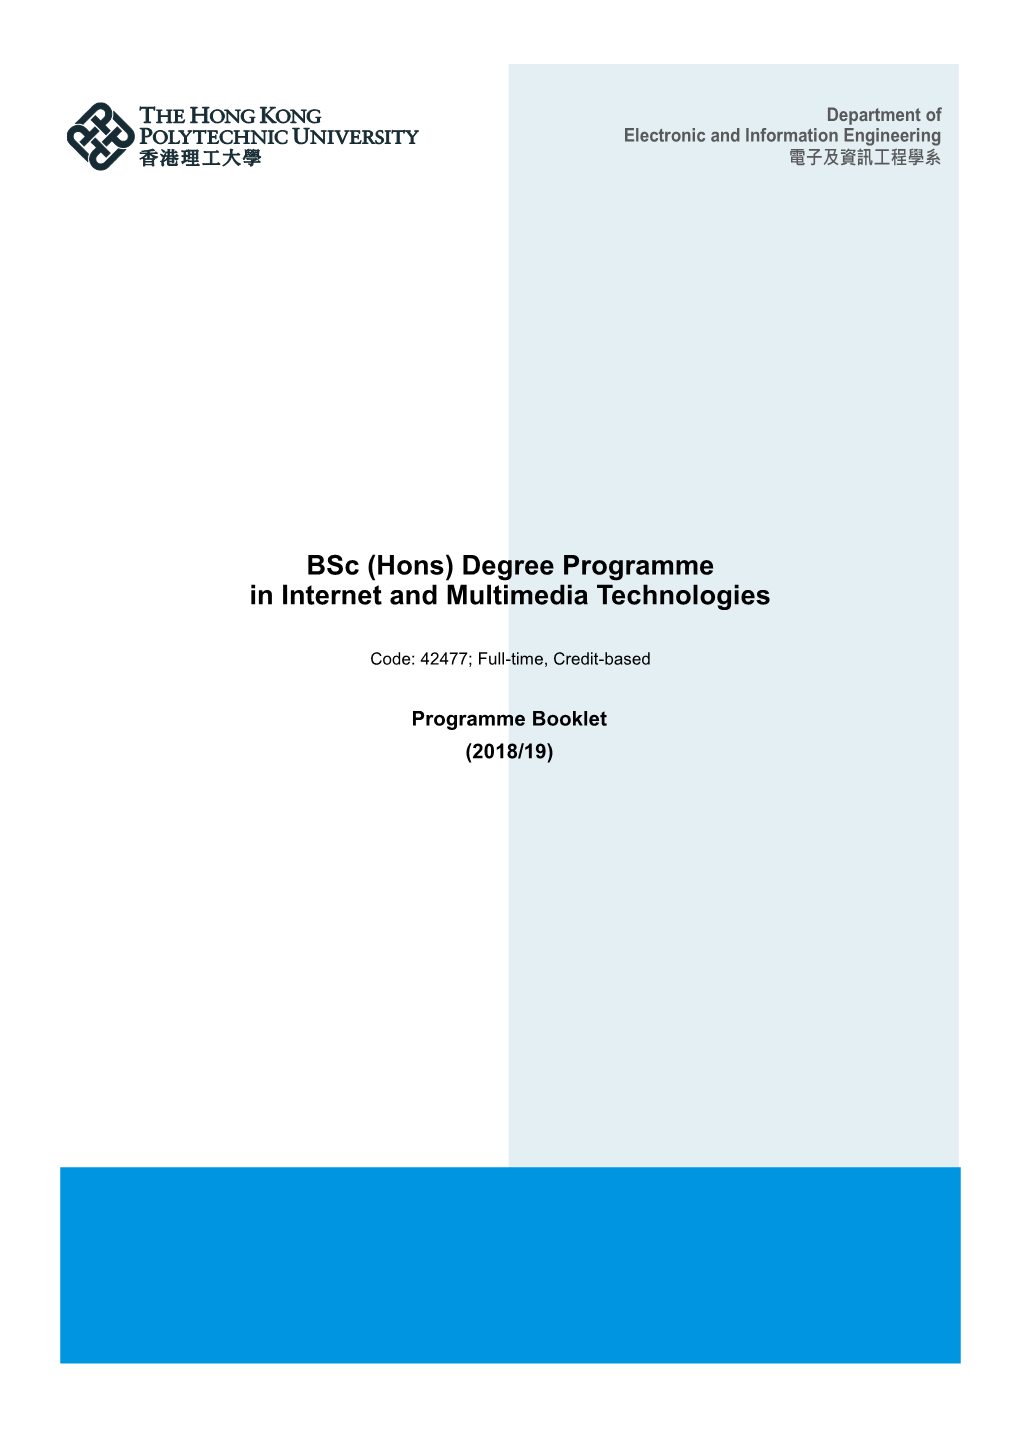 Bsc (Hons) Degree Programme in Internet and Multimedia Technologies